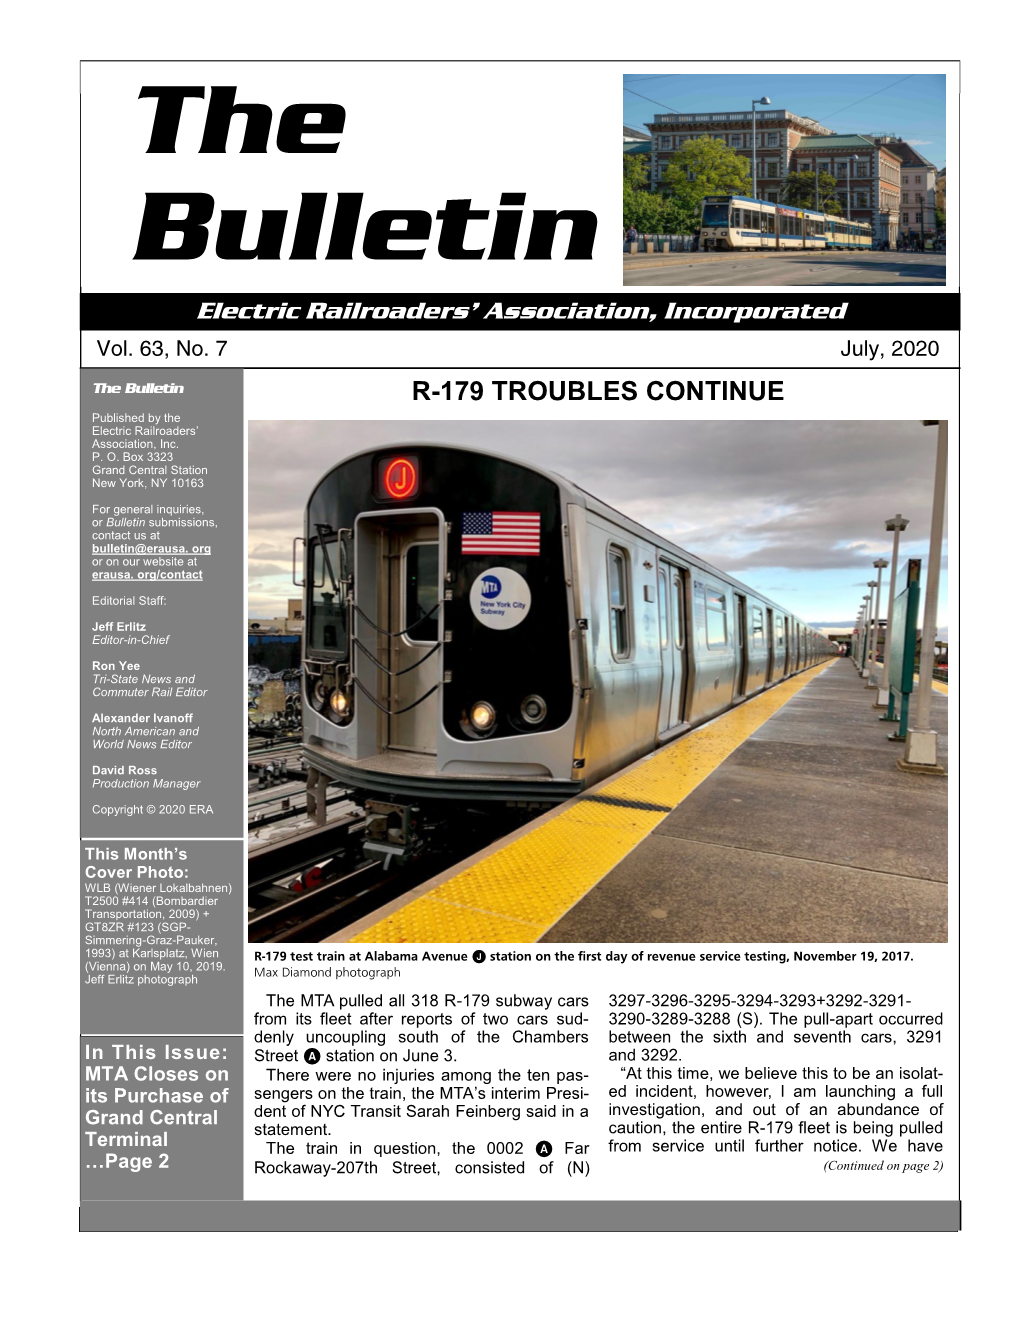 The Bulletin R-179 TROUBLES CONTINUE Published by the Electric Railroaders’ Association, Inc